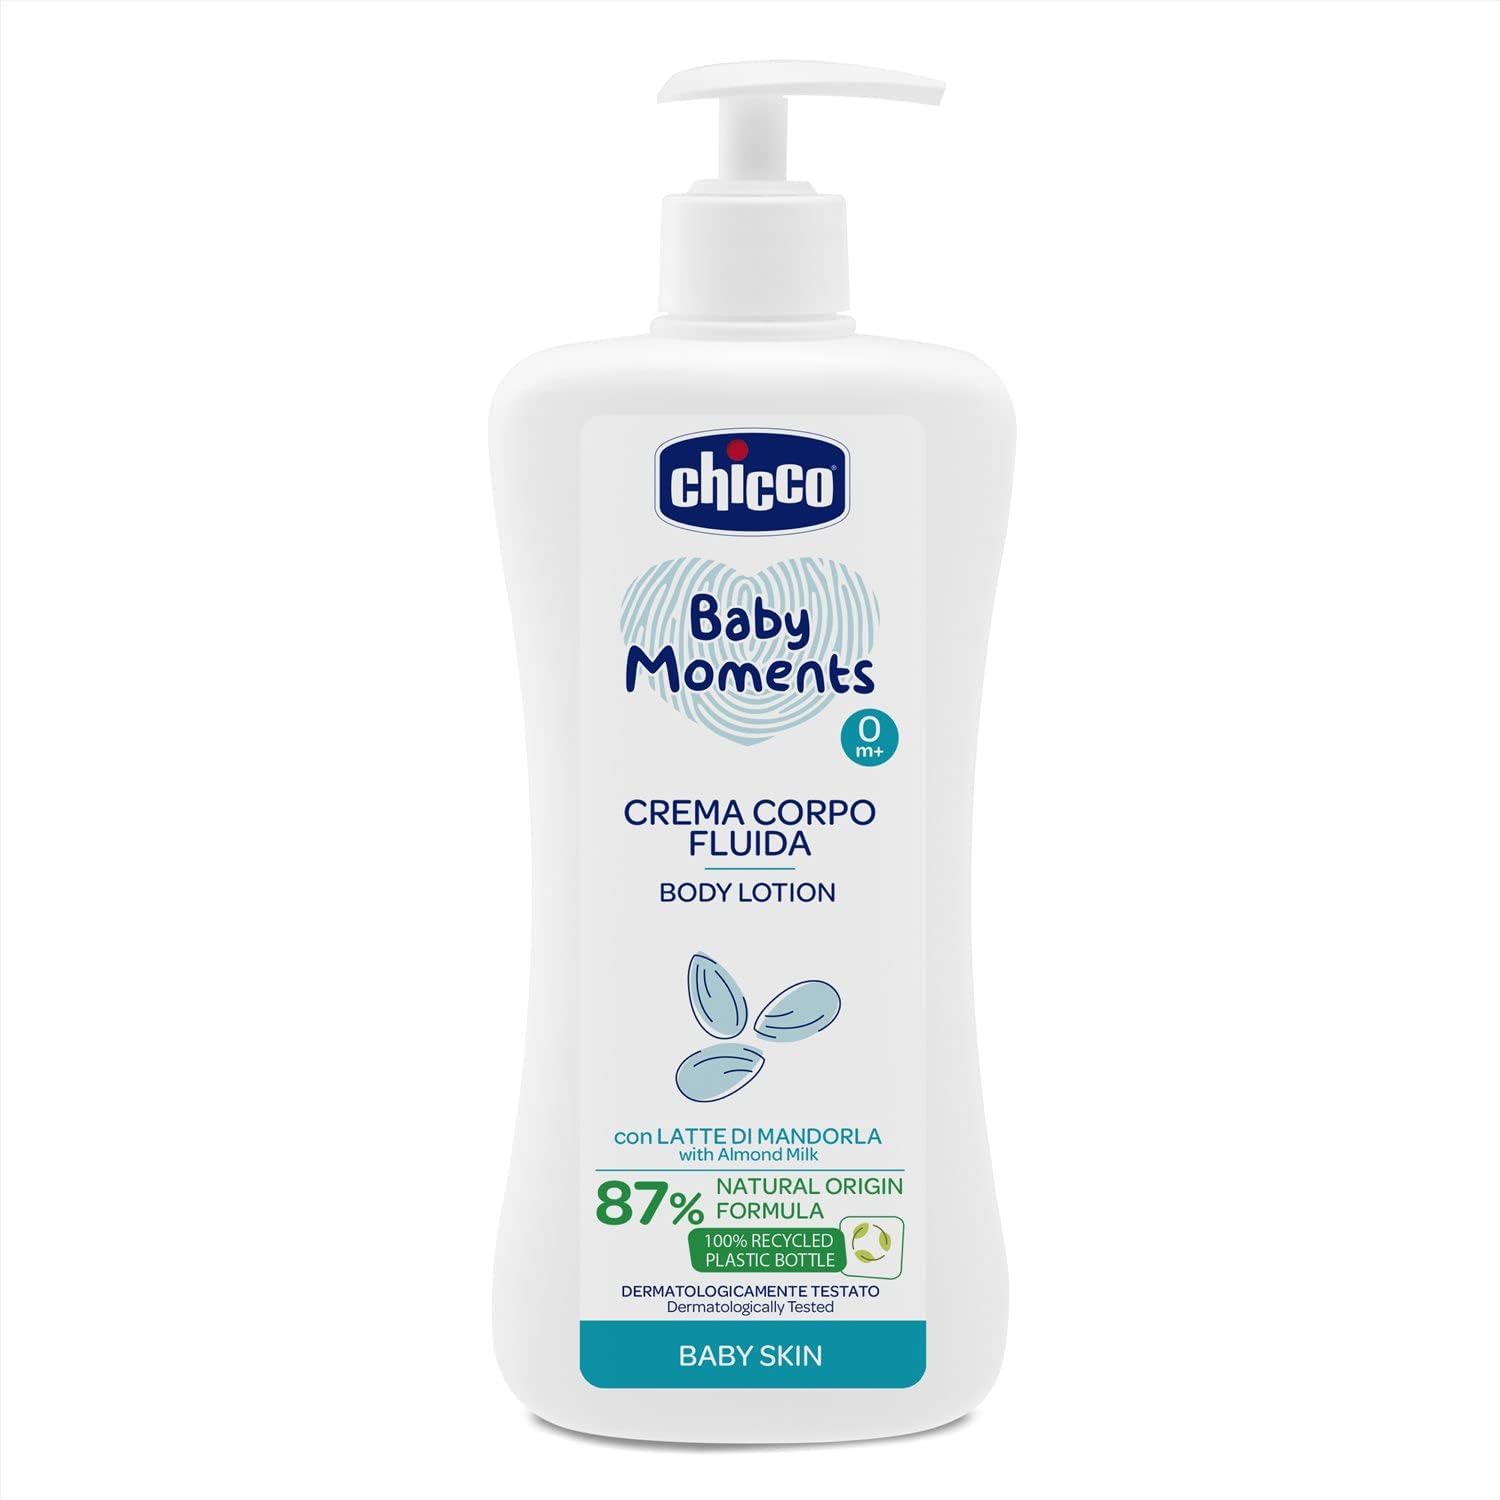 Chicco Baby Moments Body Lotion for Baby Skin, 500ml